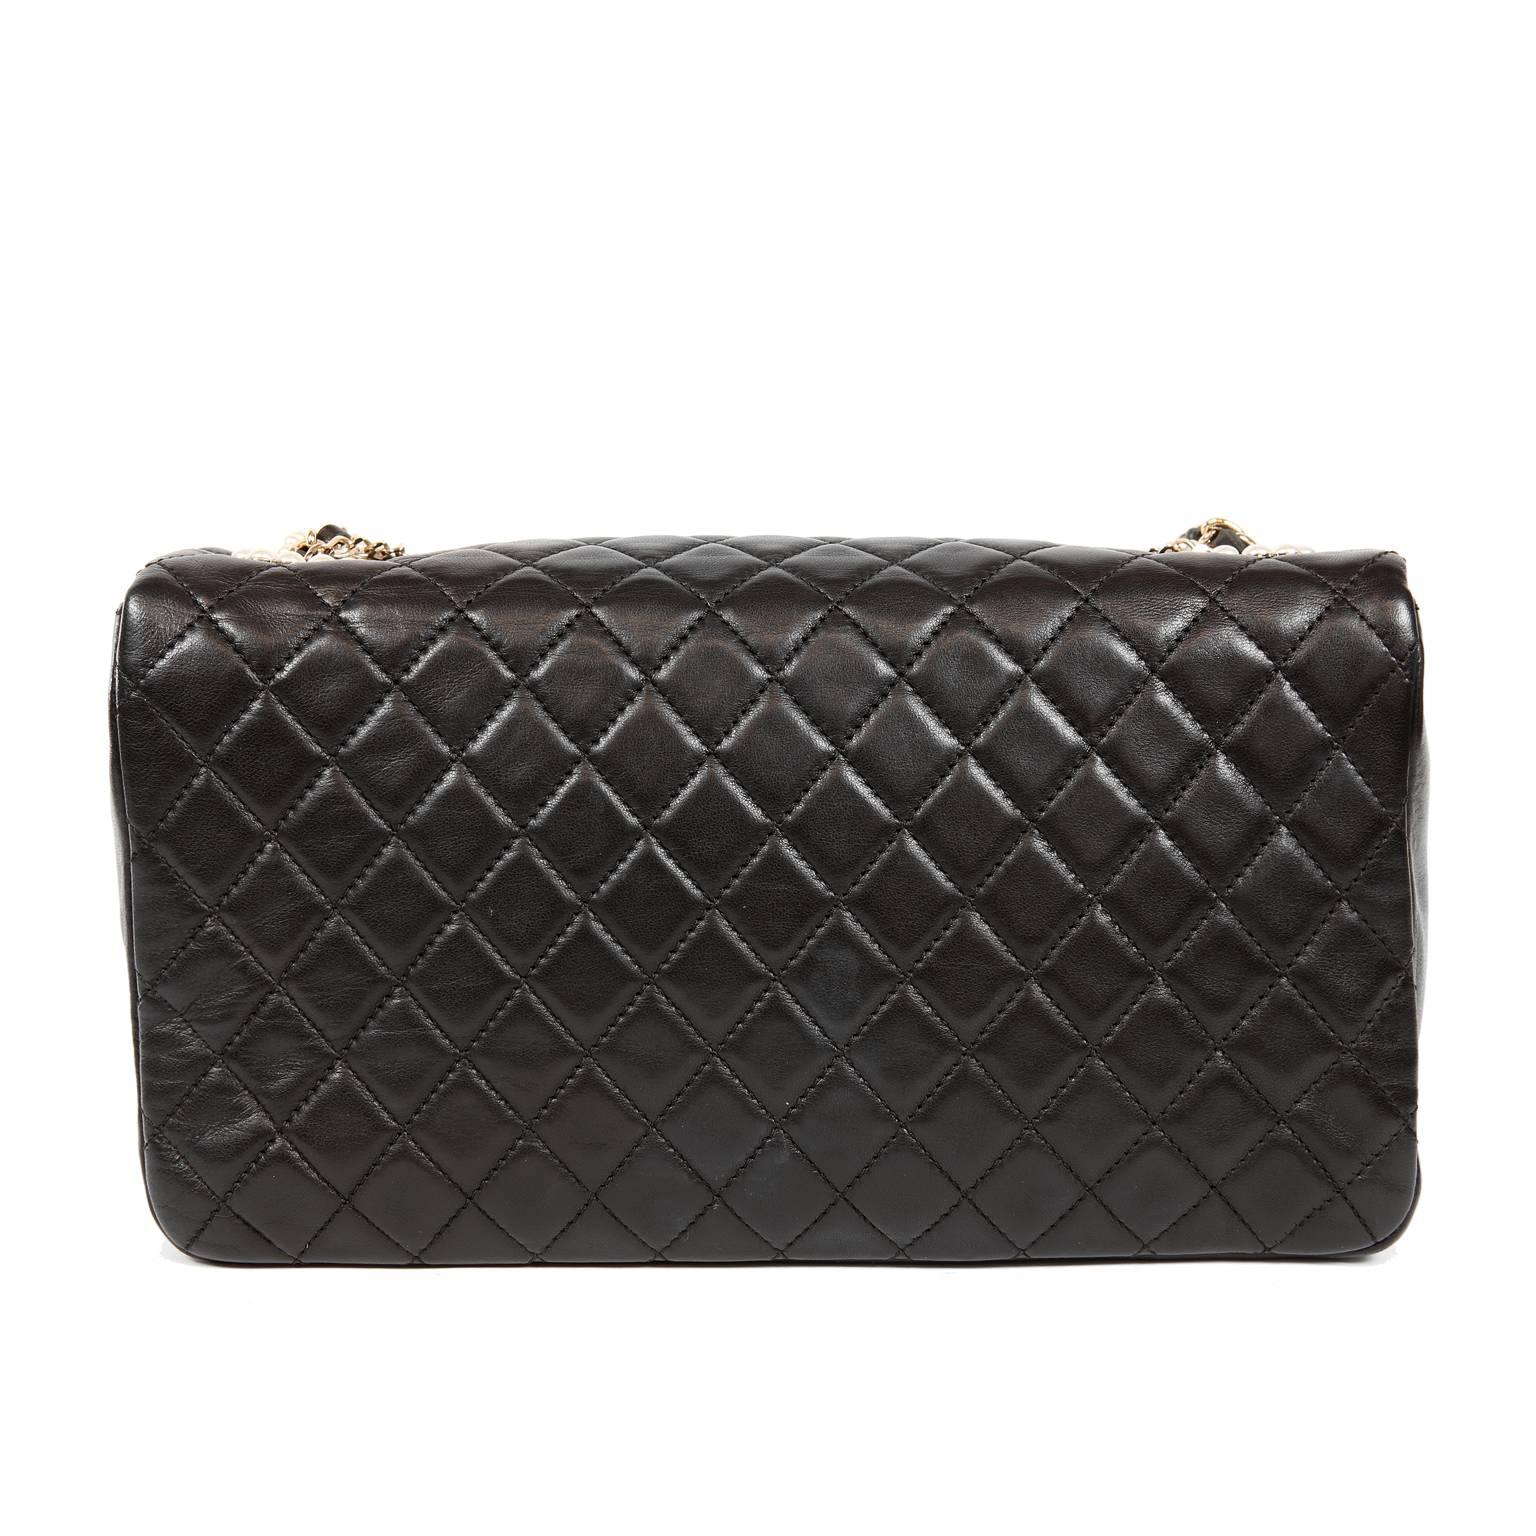 Chanel Black Lambskin Westminster Pearl Flap Bag- PRISTINE
 Collectible and beyond stunning, the Westminster Pearl Medium Flap Bag epitomizes the essence of Chanel.  Pearl and chain details enhance the Classic Flap silhouette brilliantly.  A true